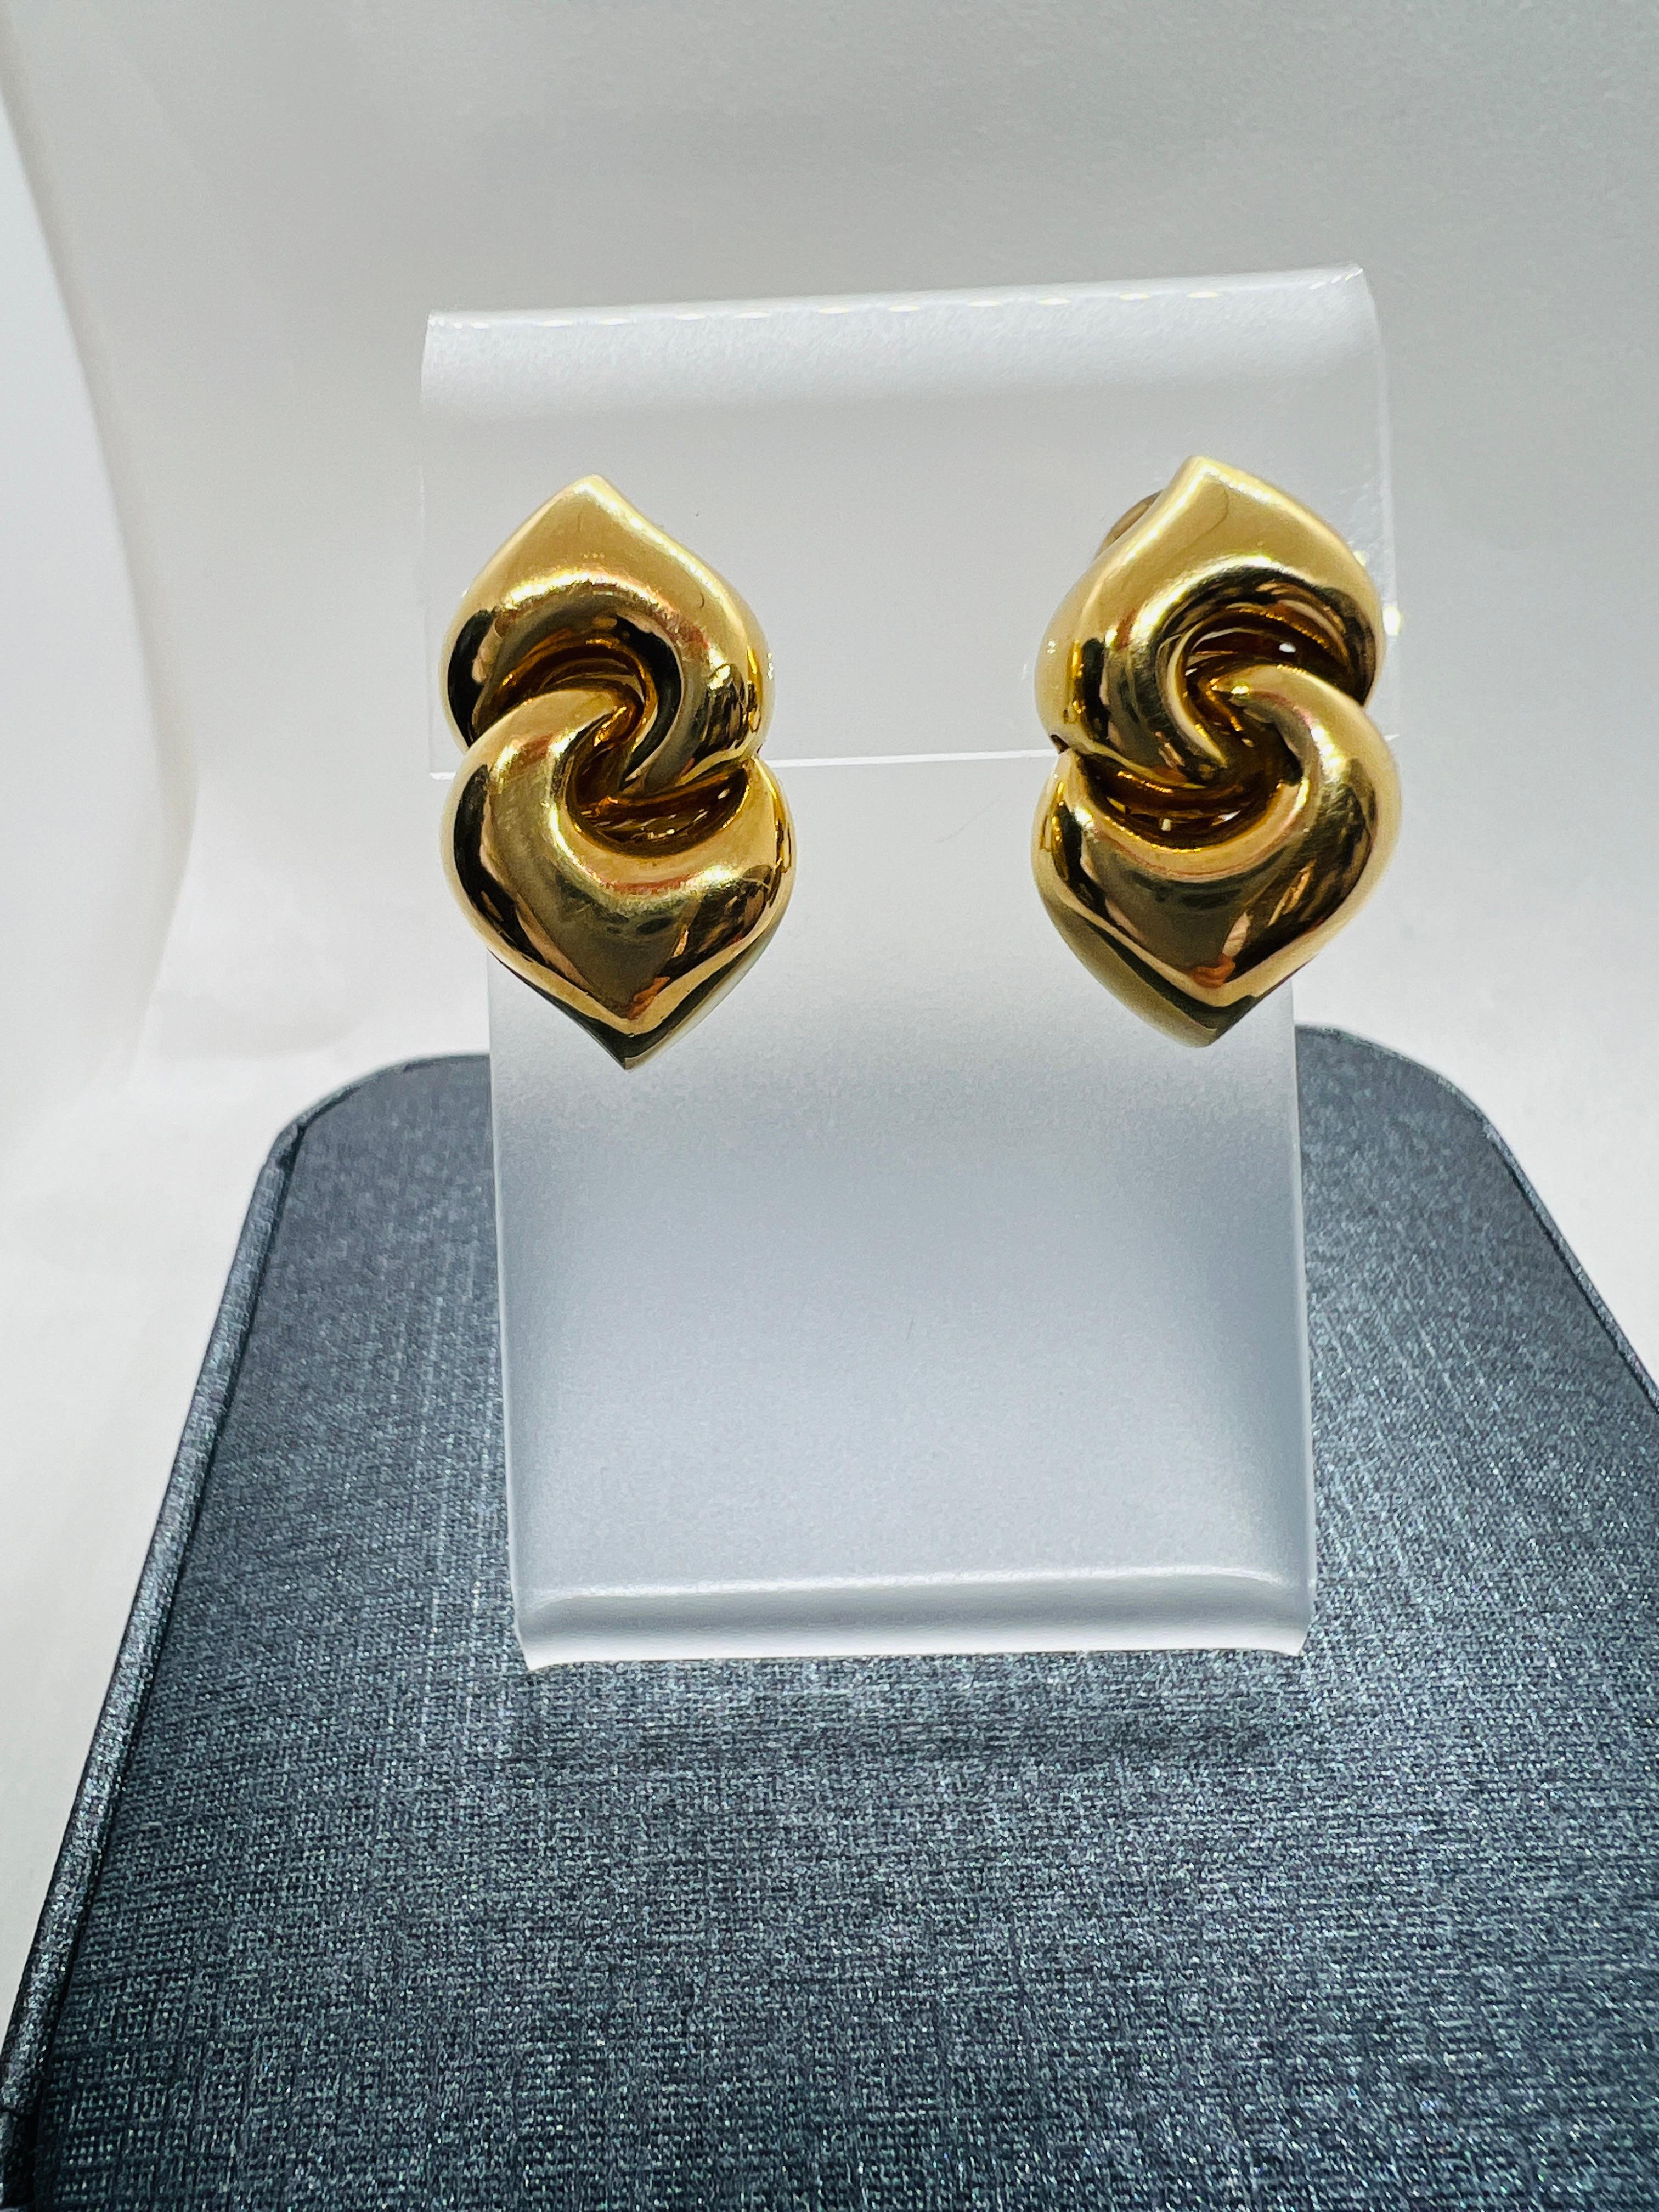 Gorgeous Bvlgari Doppio Cuore 18K yellow Gold Clip On earrings. They measure one inch ling by one quarter inch wide, They weigh 15.3 grams.
Each composed of two sculpted and polished interlacing hearts in 18k gold. Signed Bulgari, numbers